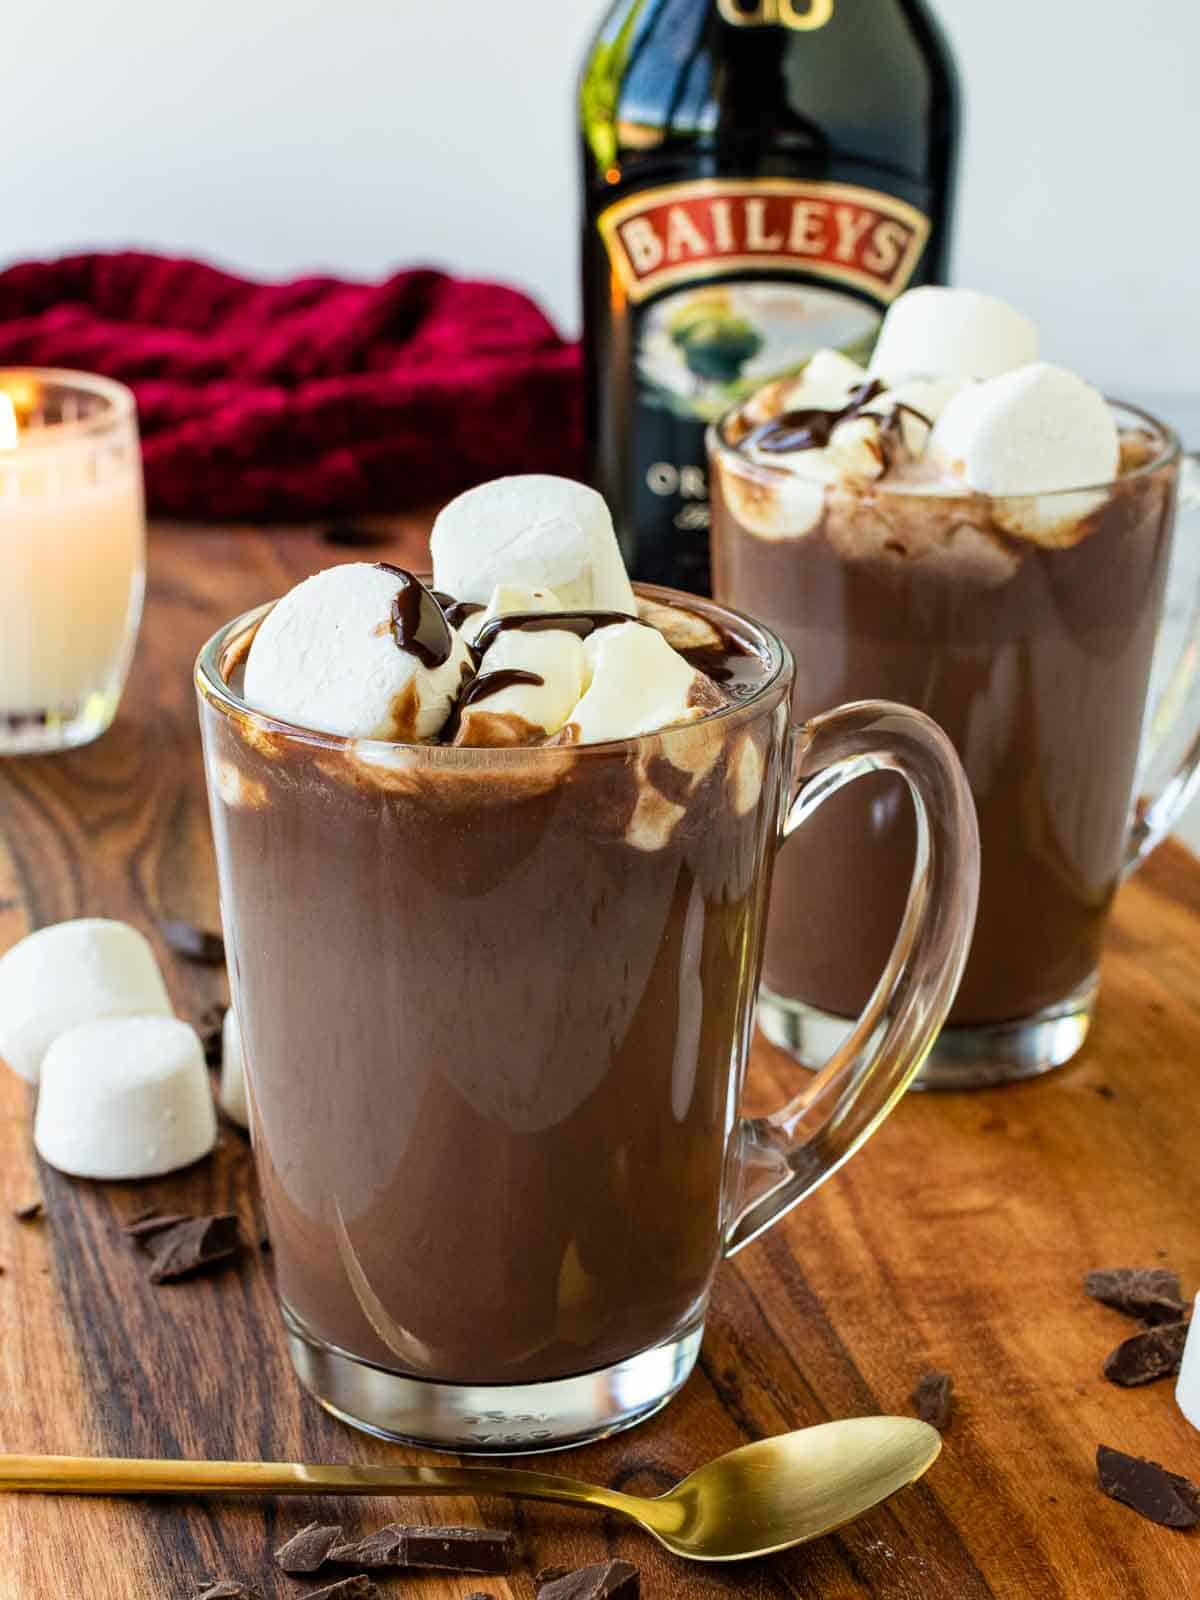 Two mugs of Baileys hot chocolate with bottle of baileys irish cream in the background.